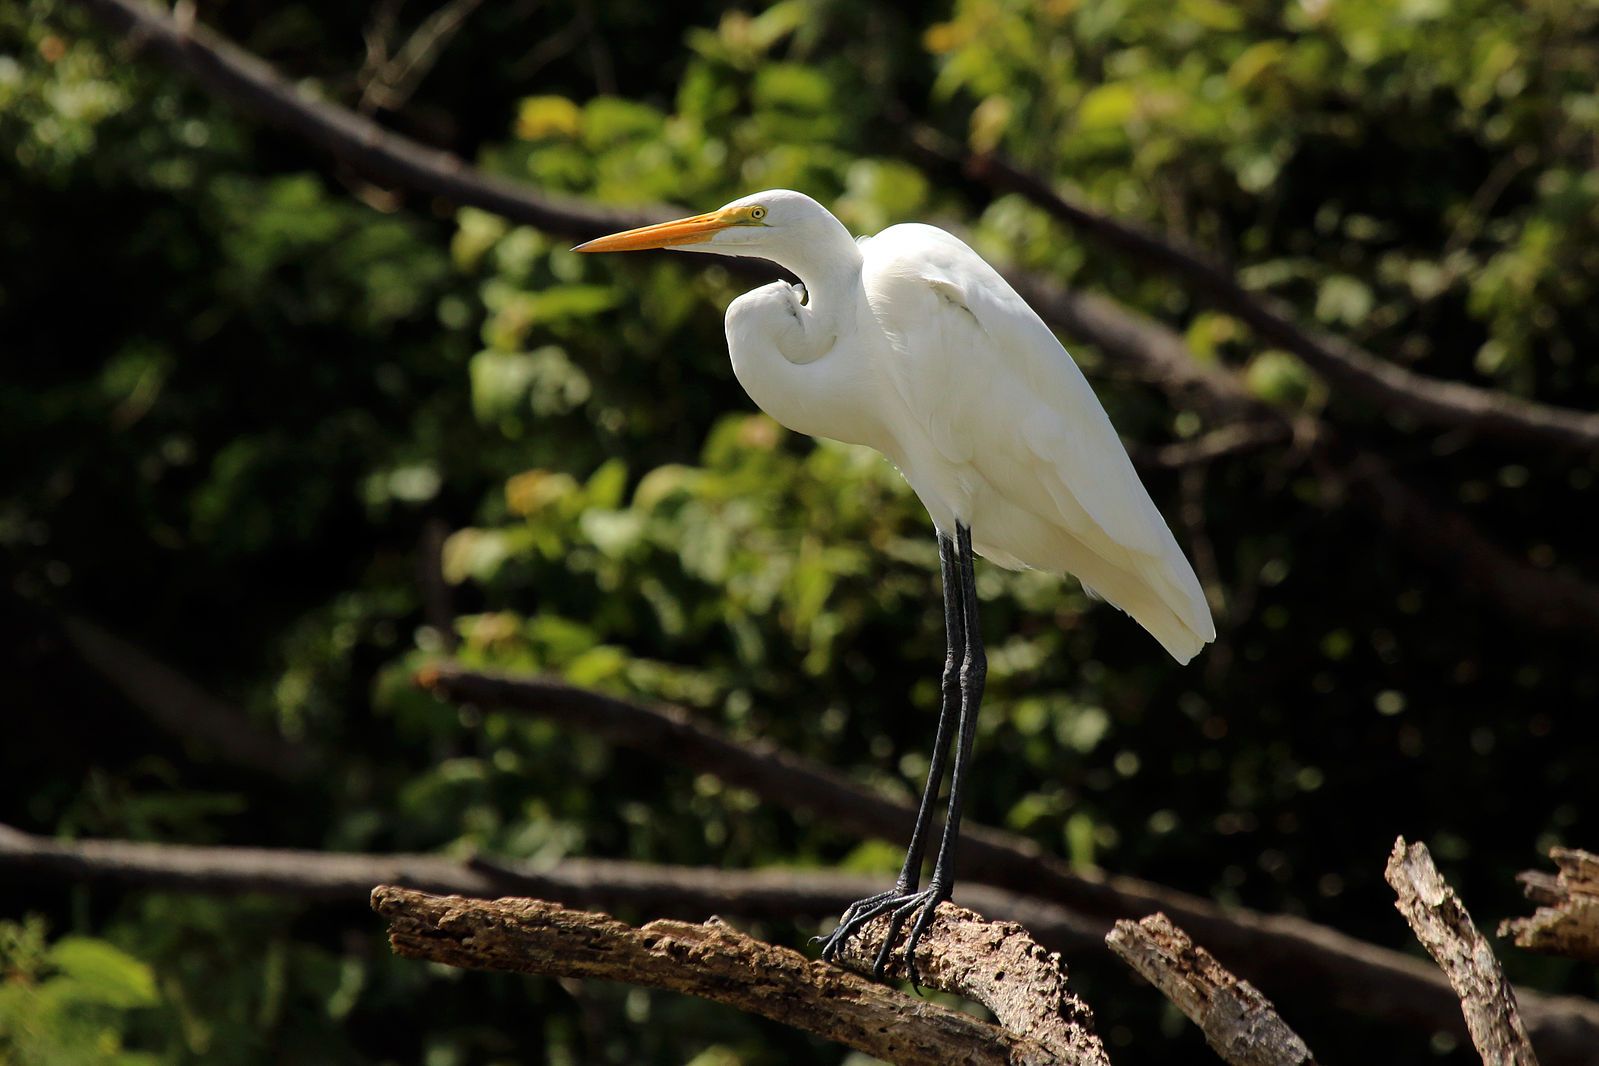 Great egret by Charles J Sharp, Wikimedia Commons